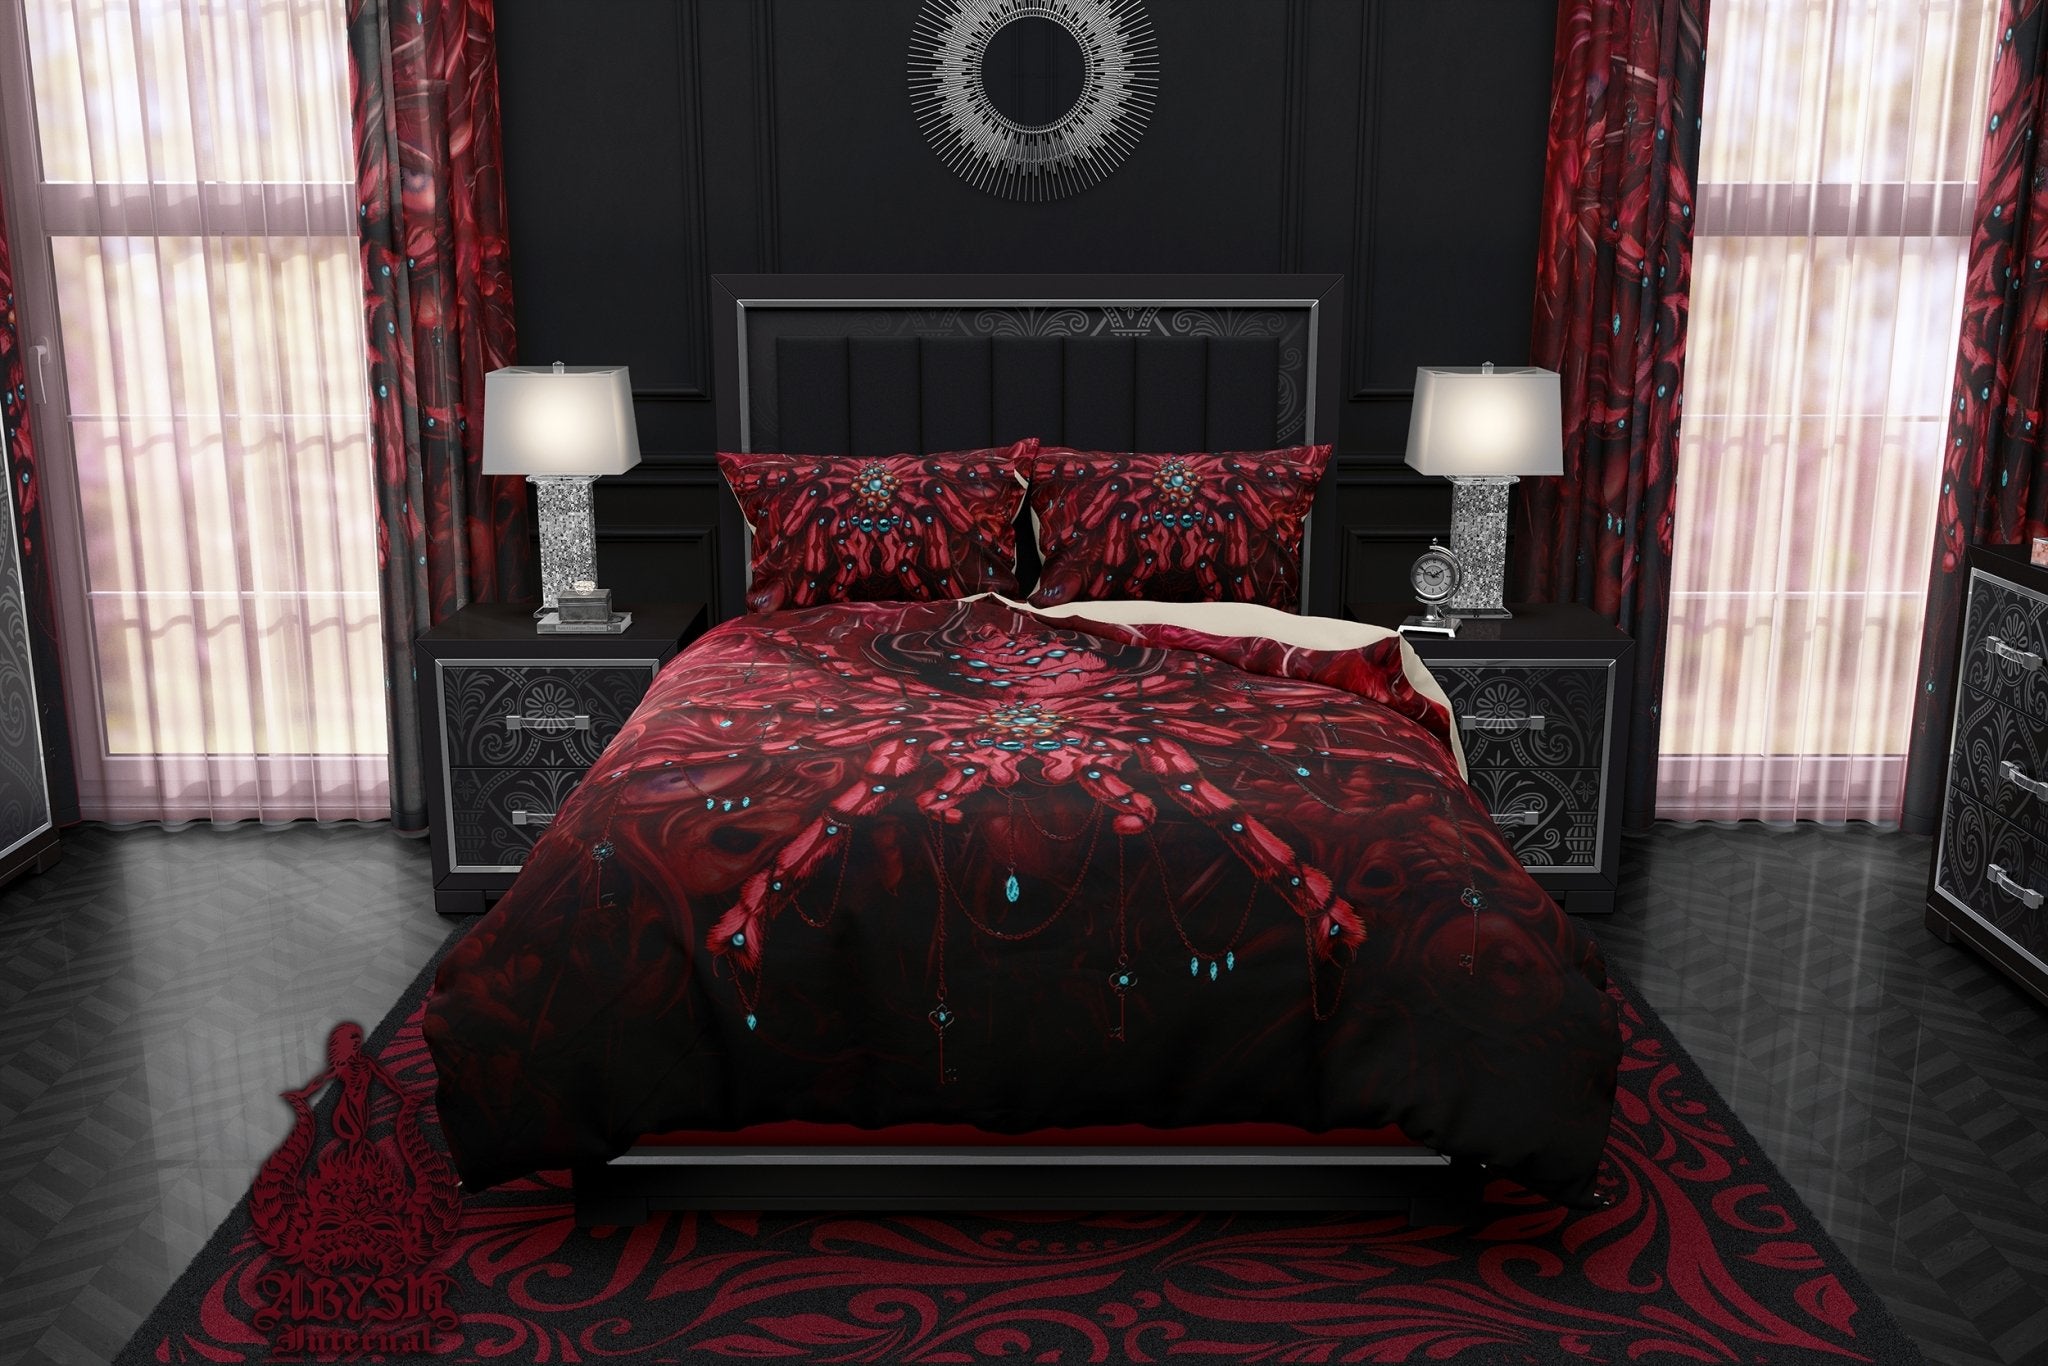 Horror Bedding Set, Comforter and Duvet, Bed Cover and Bedroom Decor, King, Queen and Twin Size - Tarantula Spider, Gore and Blood Monster - Abysm Internal